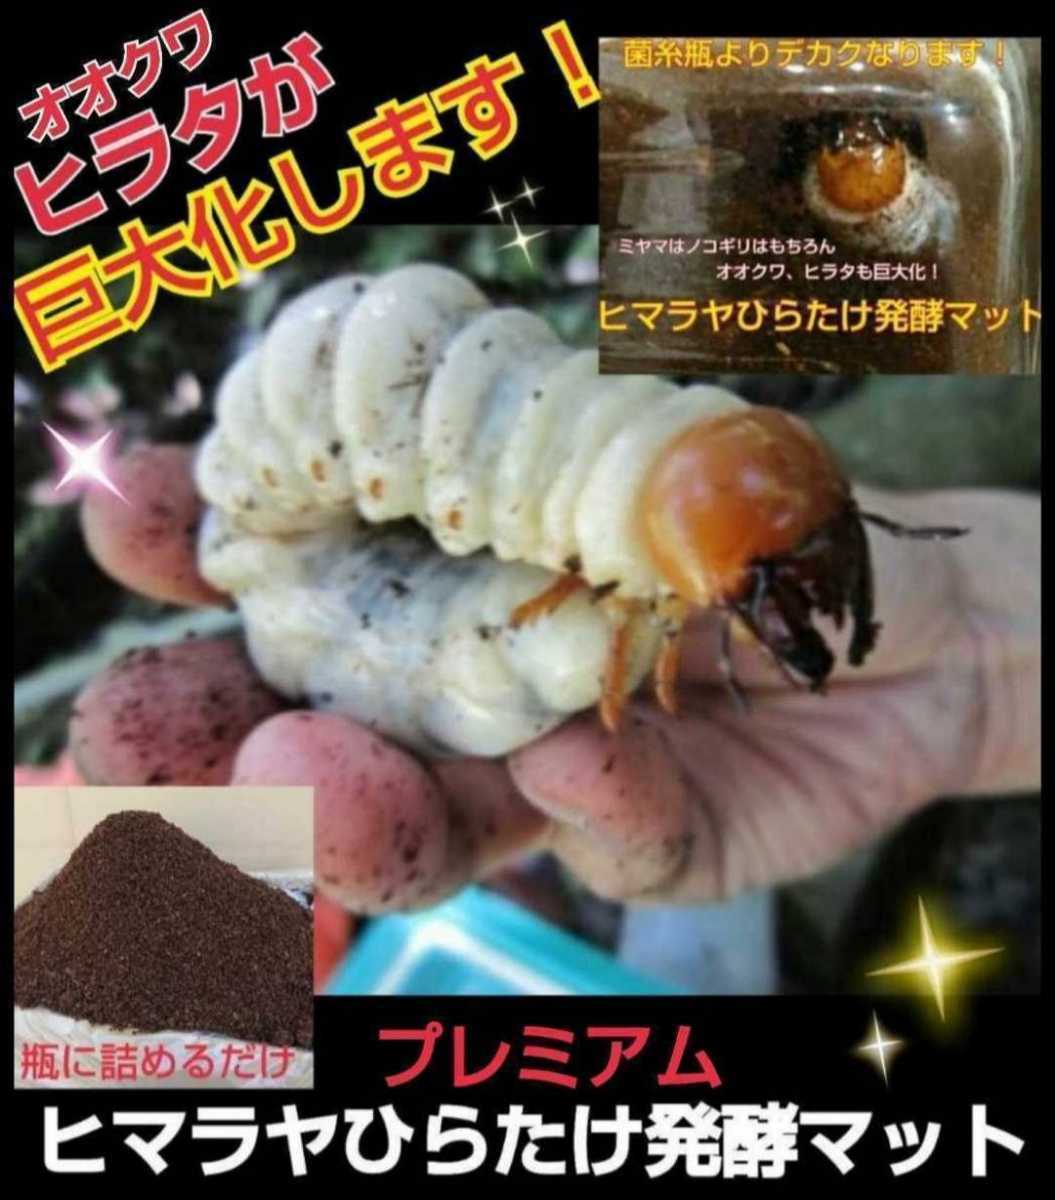  evolved! special selection premium 3 next departure . stag beetle mat * nutrition addition agent * symbiosis bacteria 3 times combination * Anne te* Miyama * common ta*nijiiro* saw .!